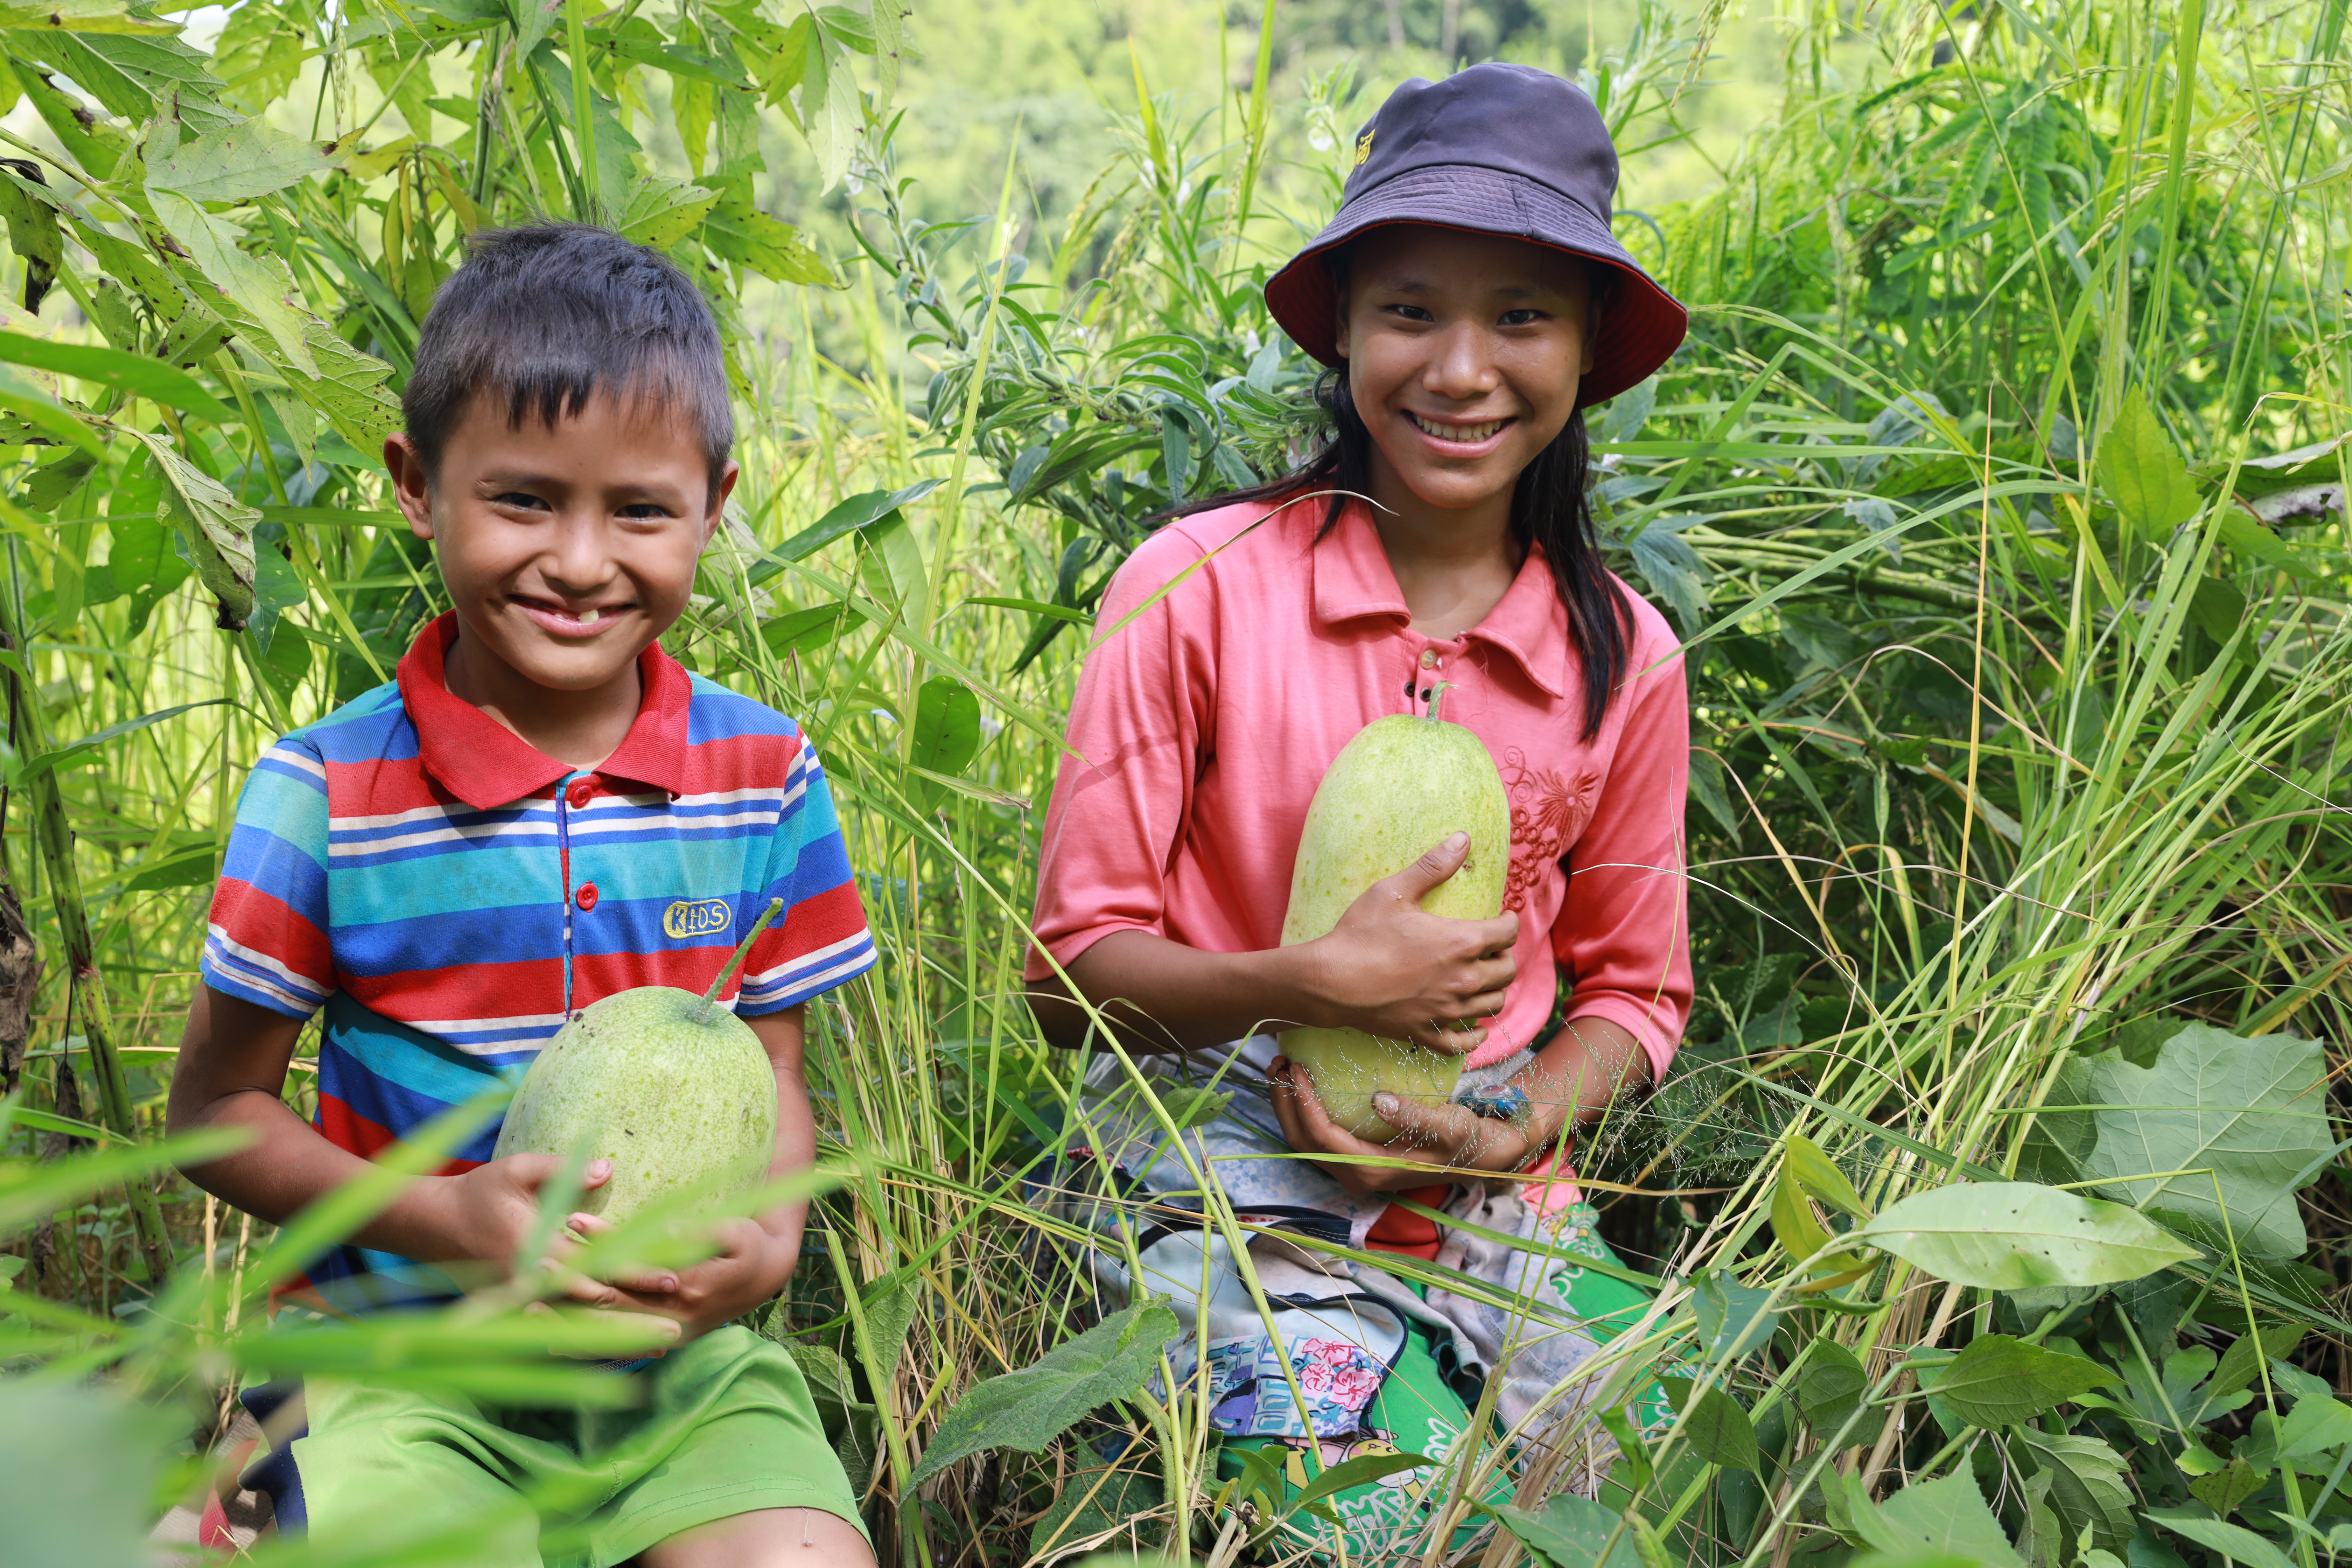 Brother and sister from Myanmar holding melons and smiling at the camera while standing in a green field of crops.